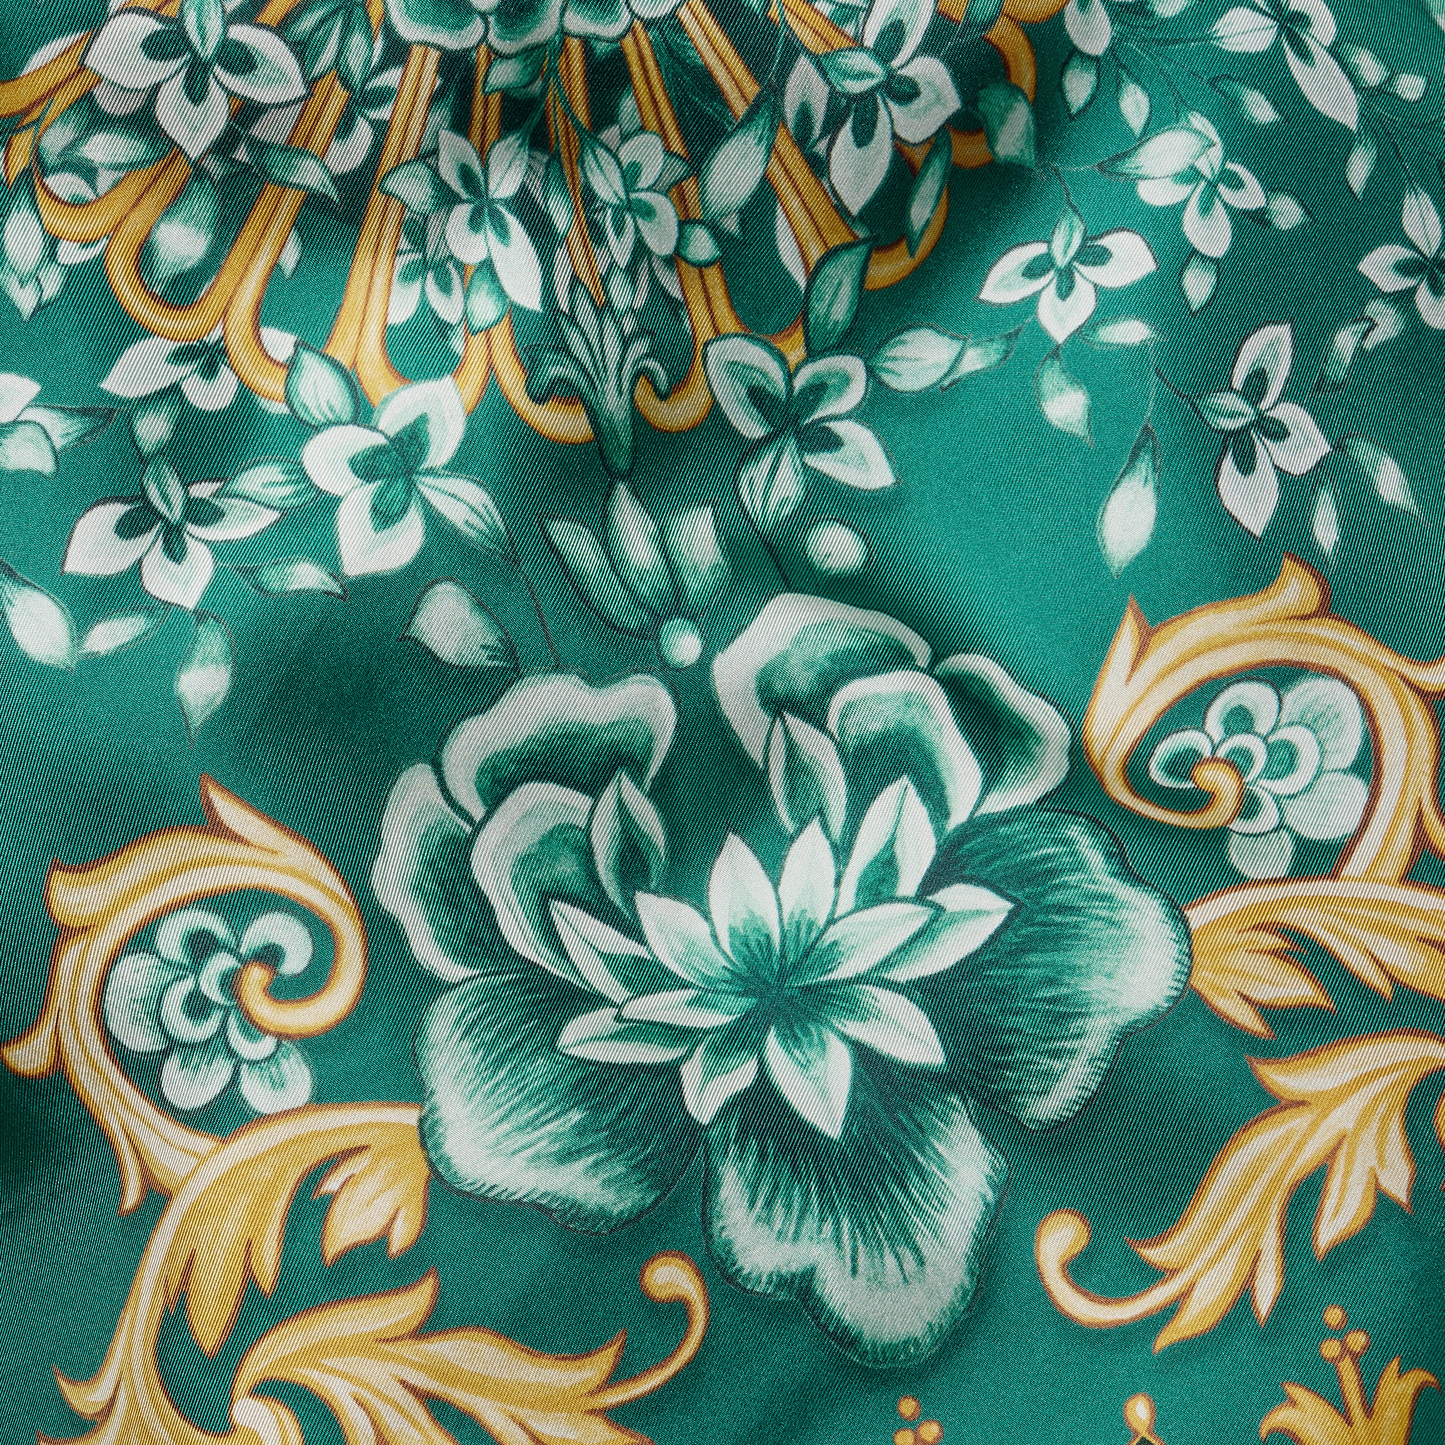 A 90mm silk scarf in a hand-painted print, inspired by the fine china in Vienna's Hofburg Palace.